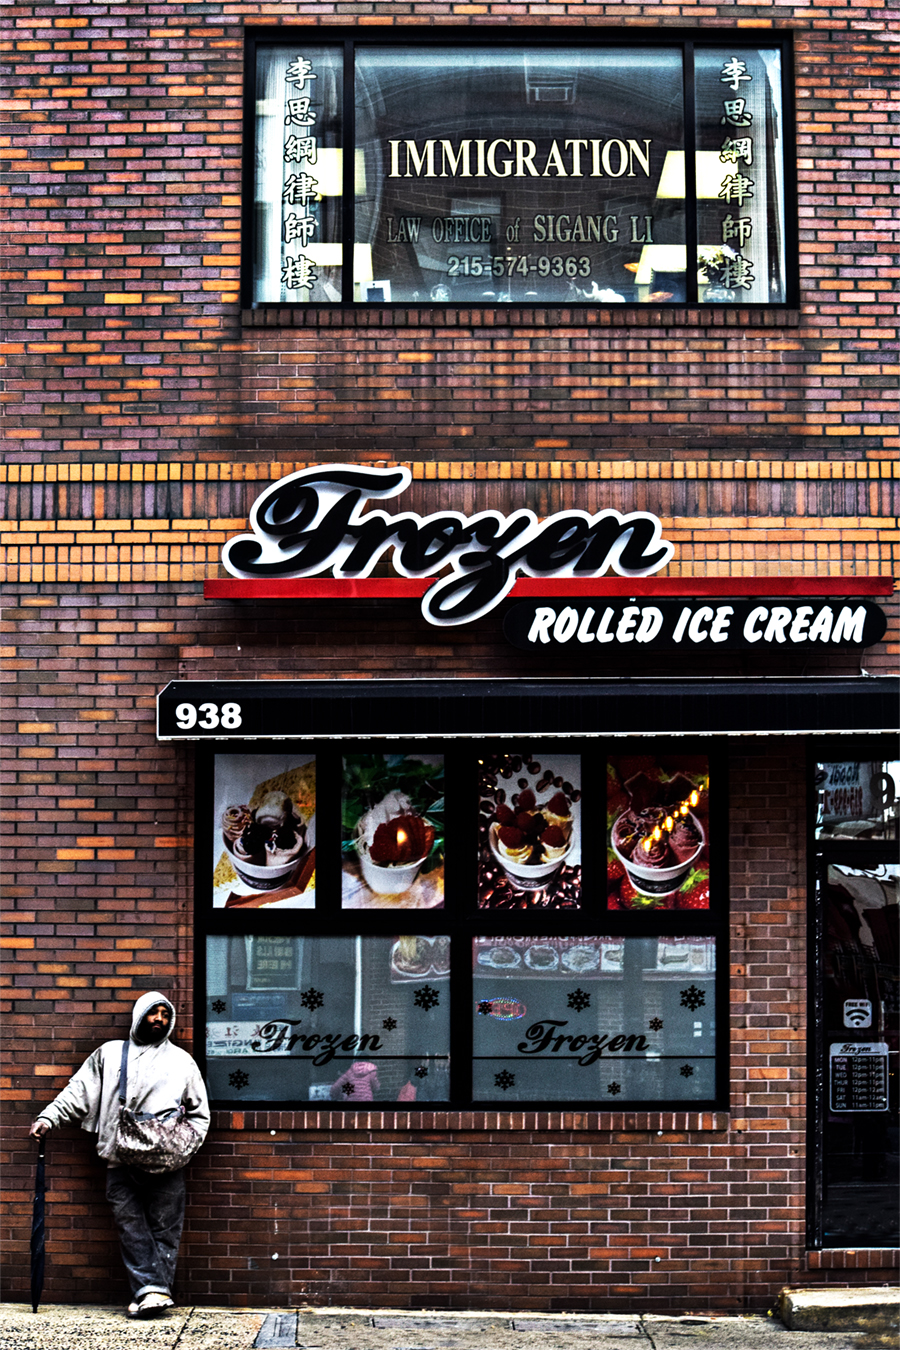 Victoria_Meng_Project3_Ice_Cream_Shop_Chinatown_Immigration_Office_Philadelphia_Philly_High_Pass